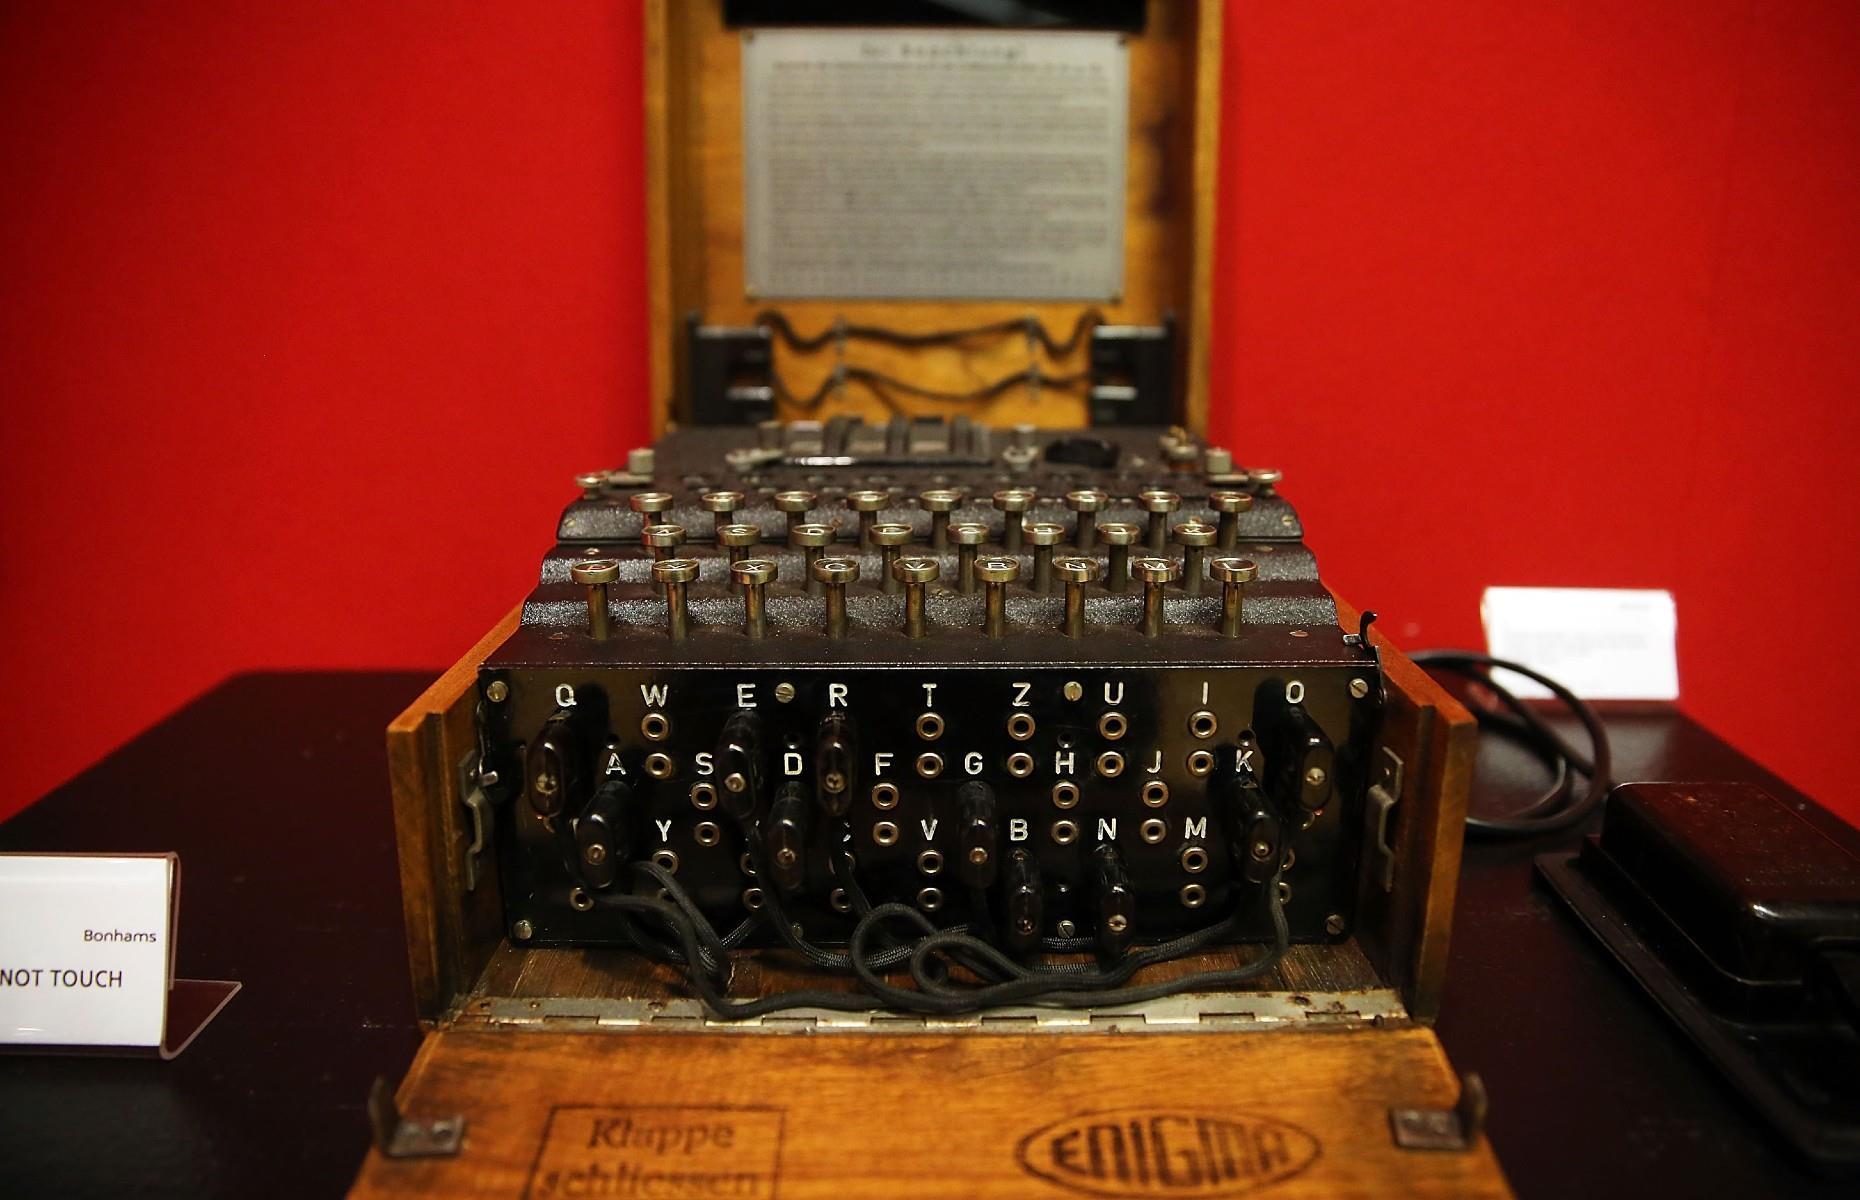 Enigma machine from WWII, Baltic Sea